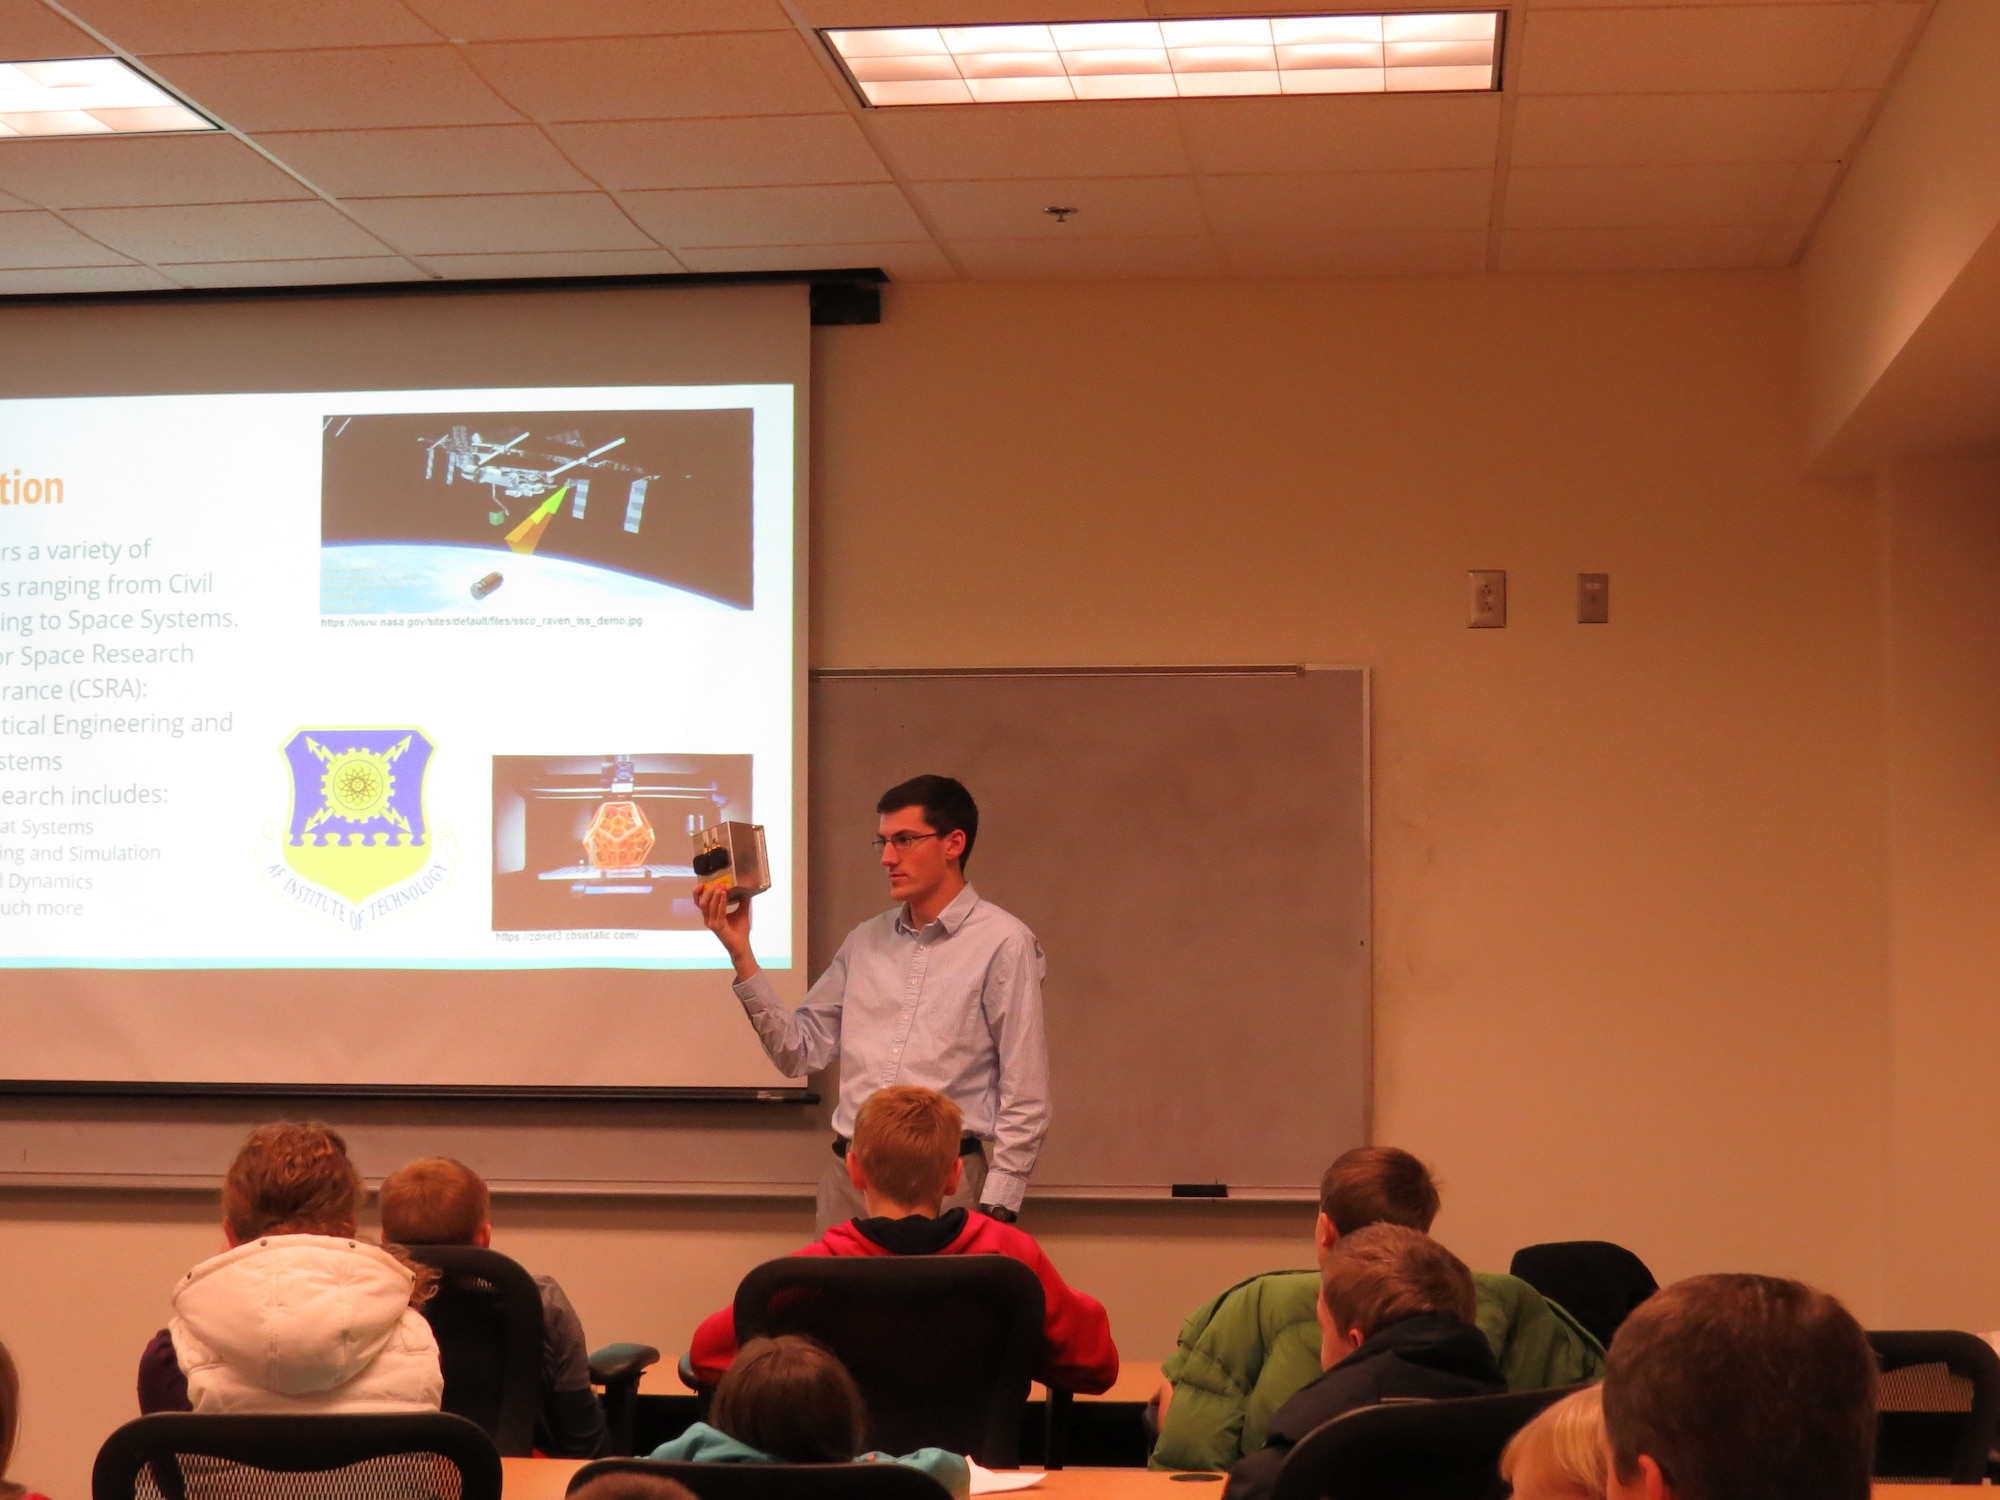 Air Force Institute of Technology astronautical engineering graduate student, William Gallagher shows local STEM students interested in space an example of CubeSat hardware from the Center for Space Research and Assurance.  The mission shown is scheduled to launch in 2019.  CSRA is currently developing a space-qualified 6U CubeSat bus, or a space vehicle designed to carry a variety of different mission payloads to support hands-on student education and research.  The bus will be designed with the ability to upload new flight and payload software while on-orbit. (U.S. Air Force photo/Jaclyn Knapp)